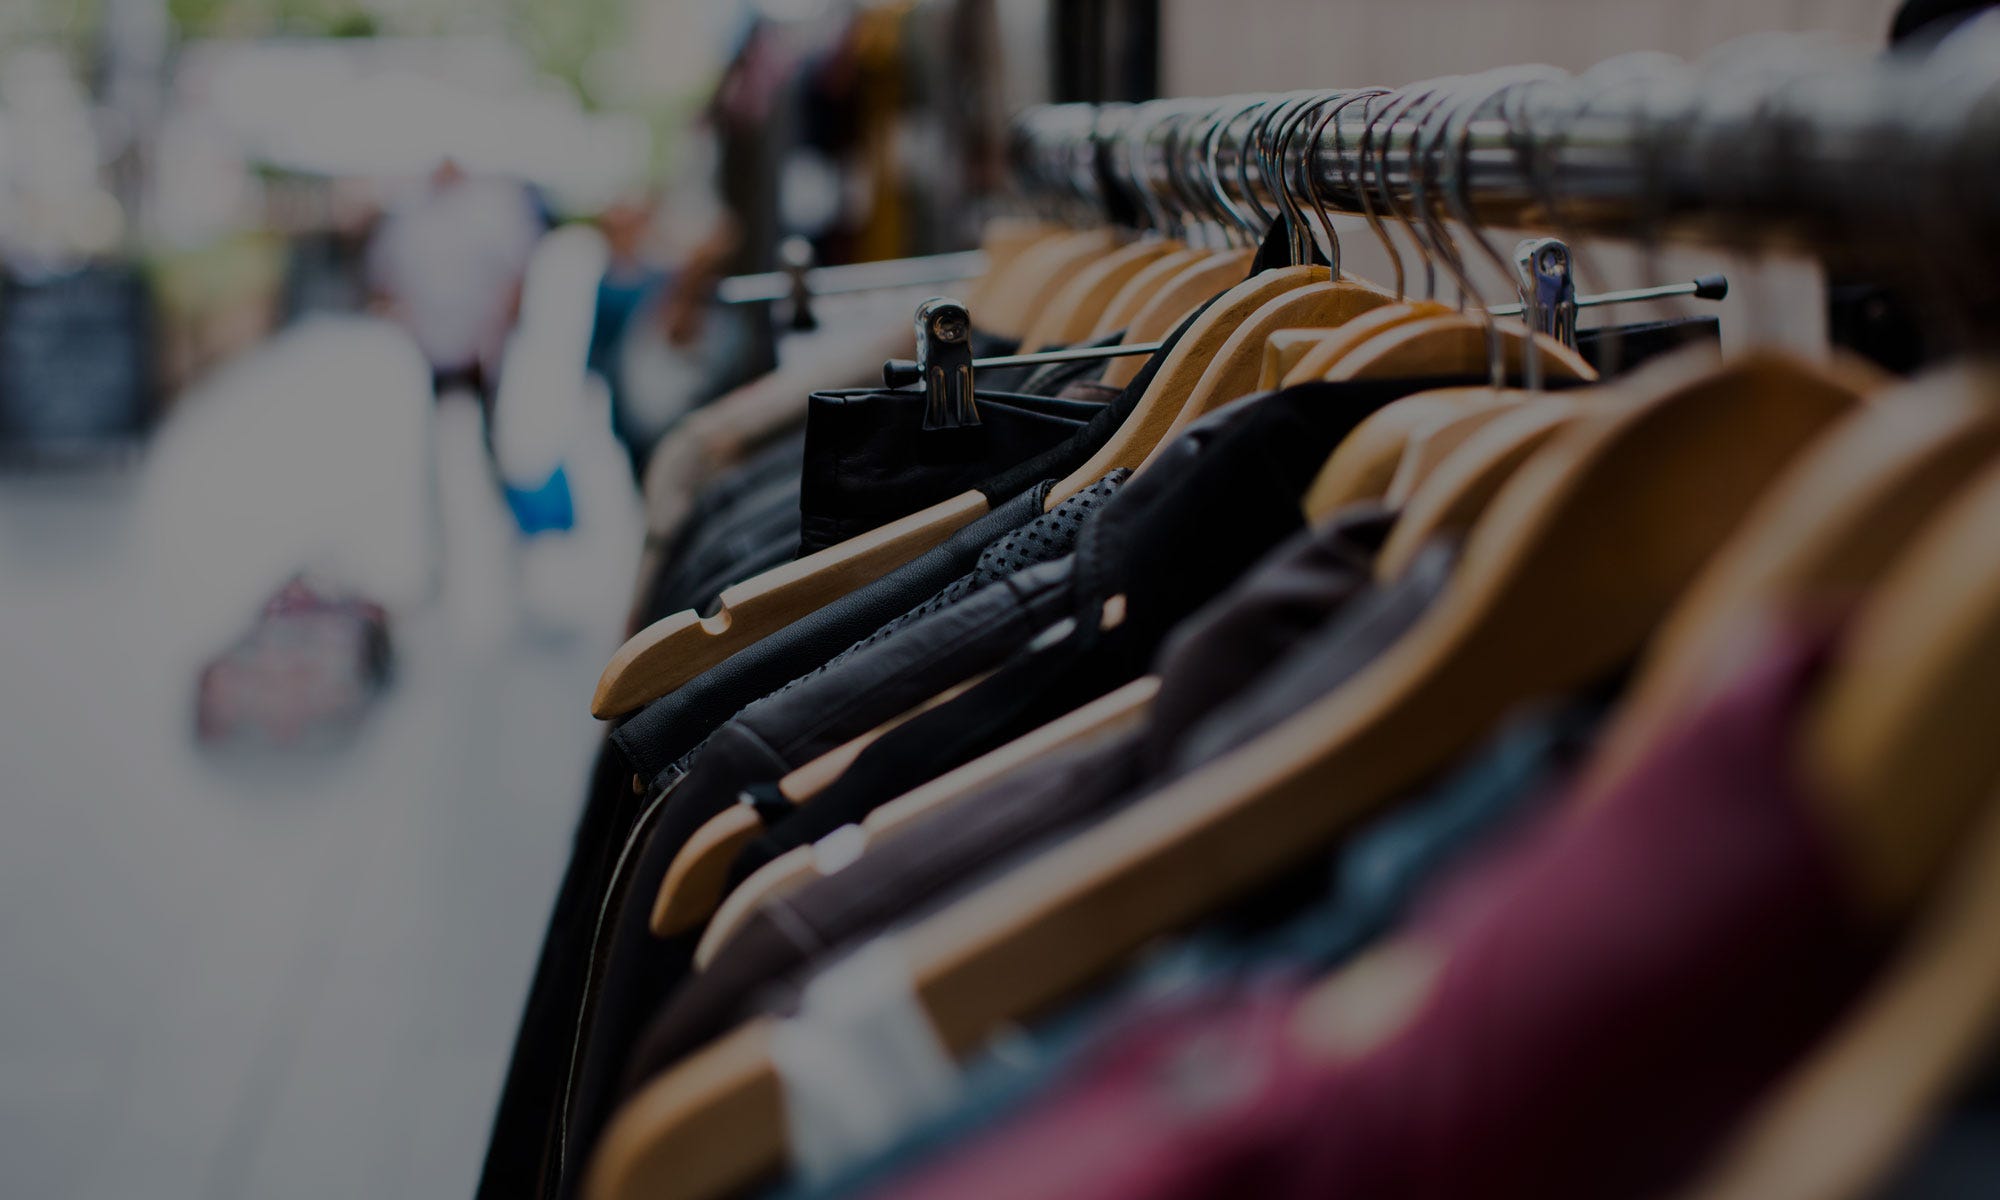 An opportunity for clothing retailers: Here is what we would like you